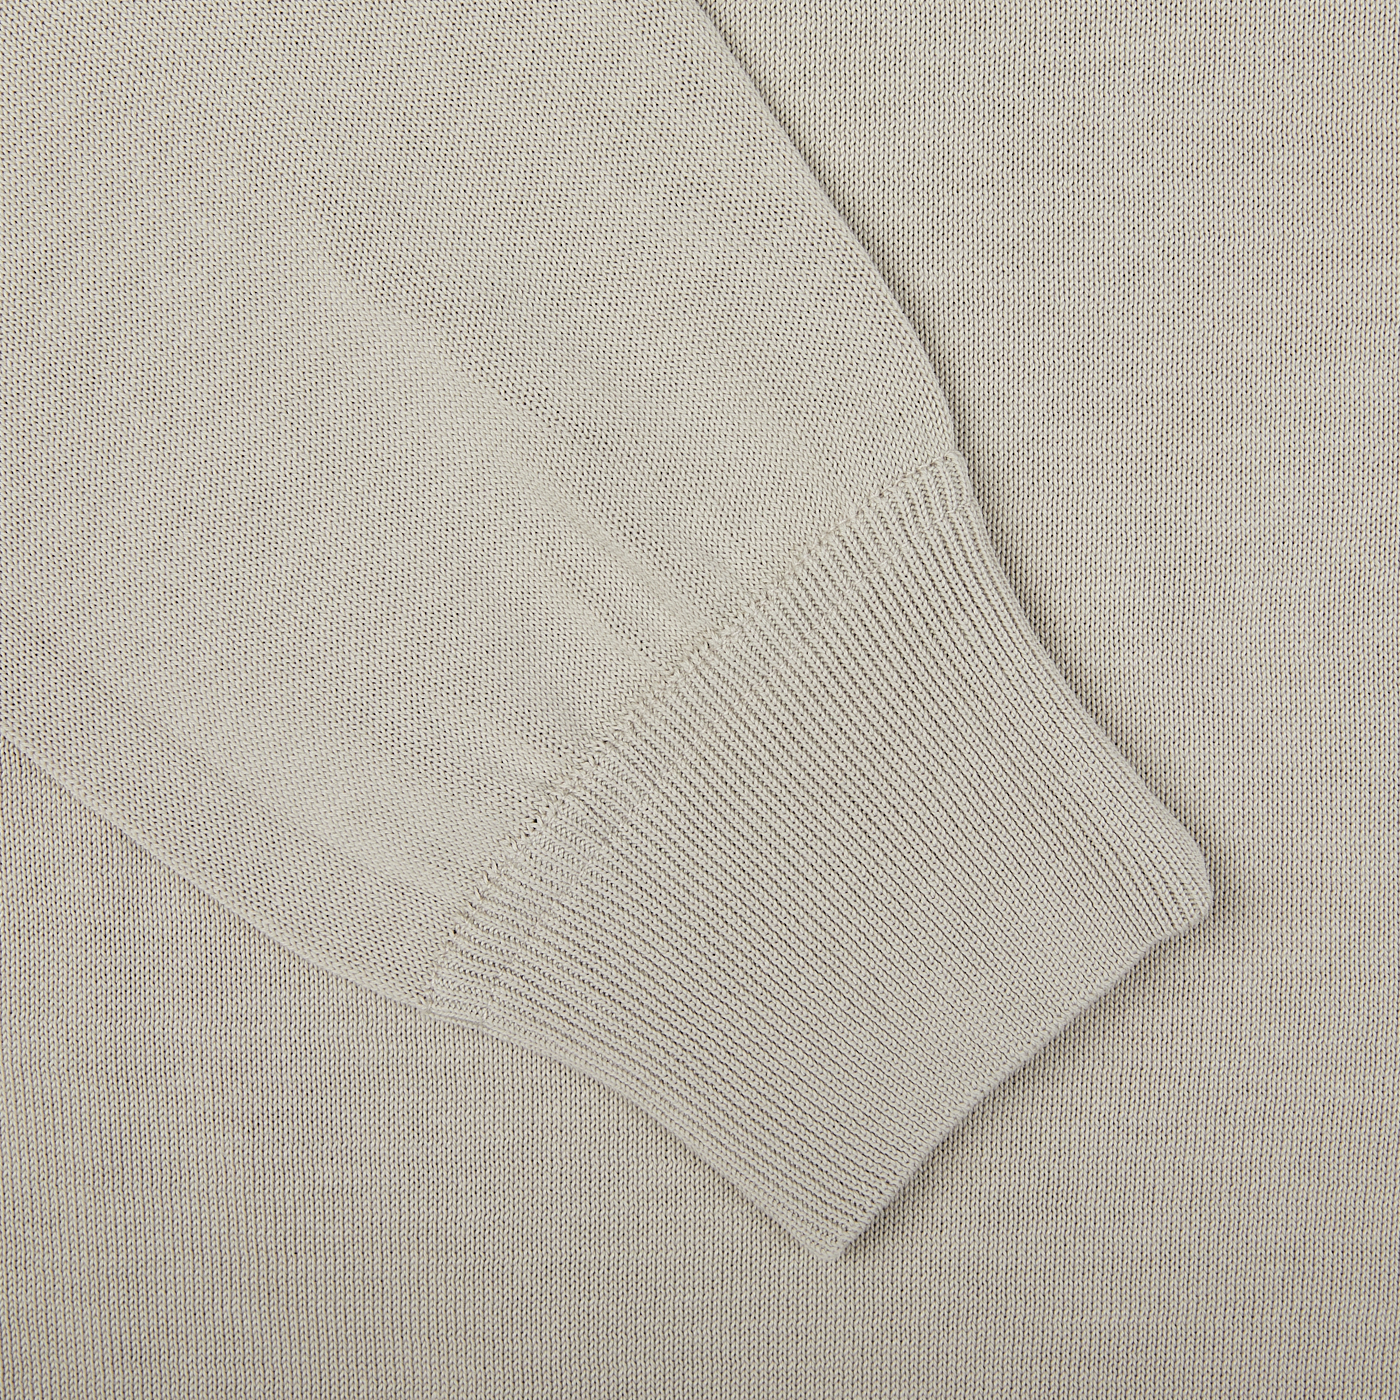 A close-up image of a Nebbia Grey Crepe Cotton Crew Neck Sweater by Filippo de Laurentiis.